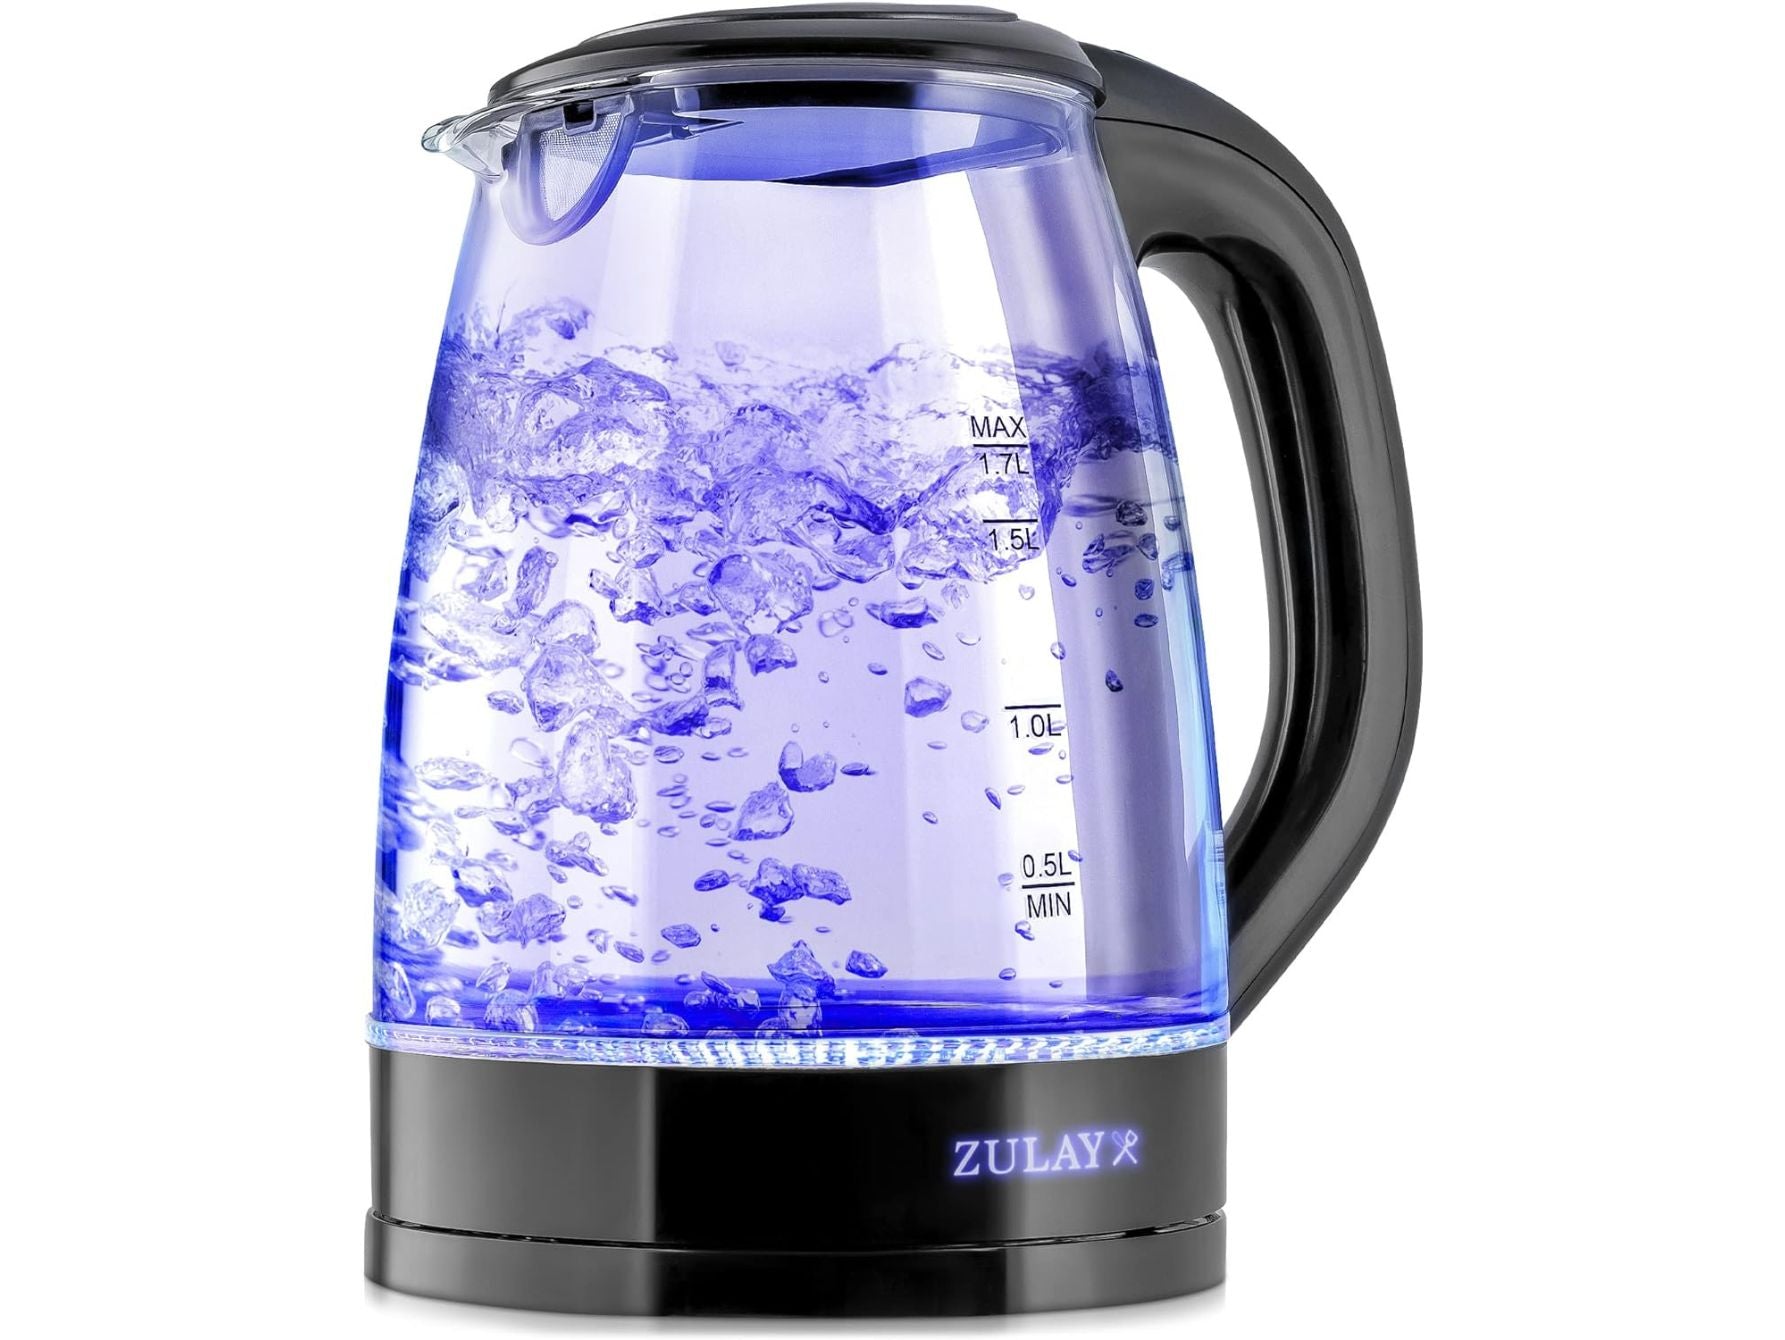 Zulay 1.7L Glass Electric Kettle with Blue LED Light